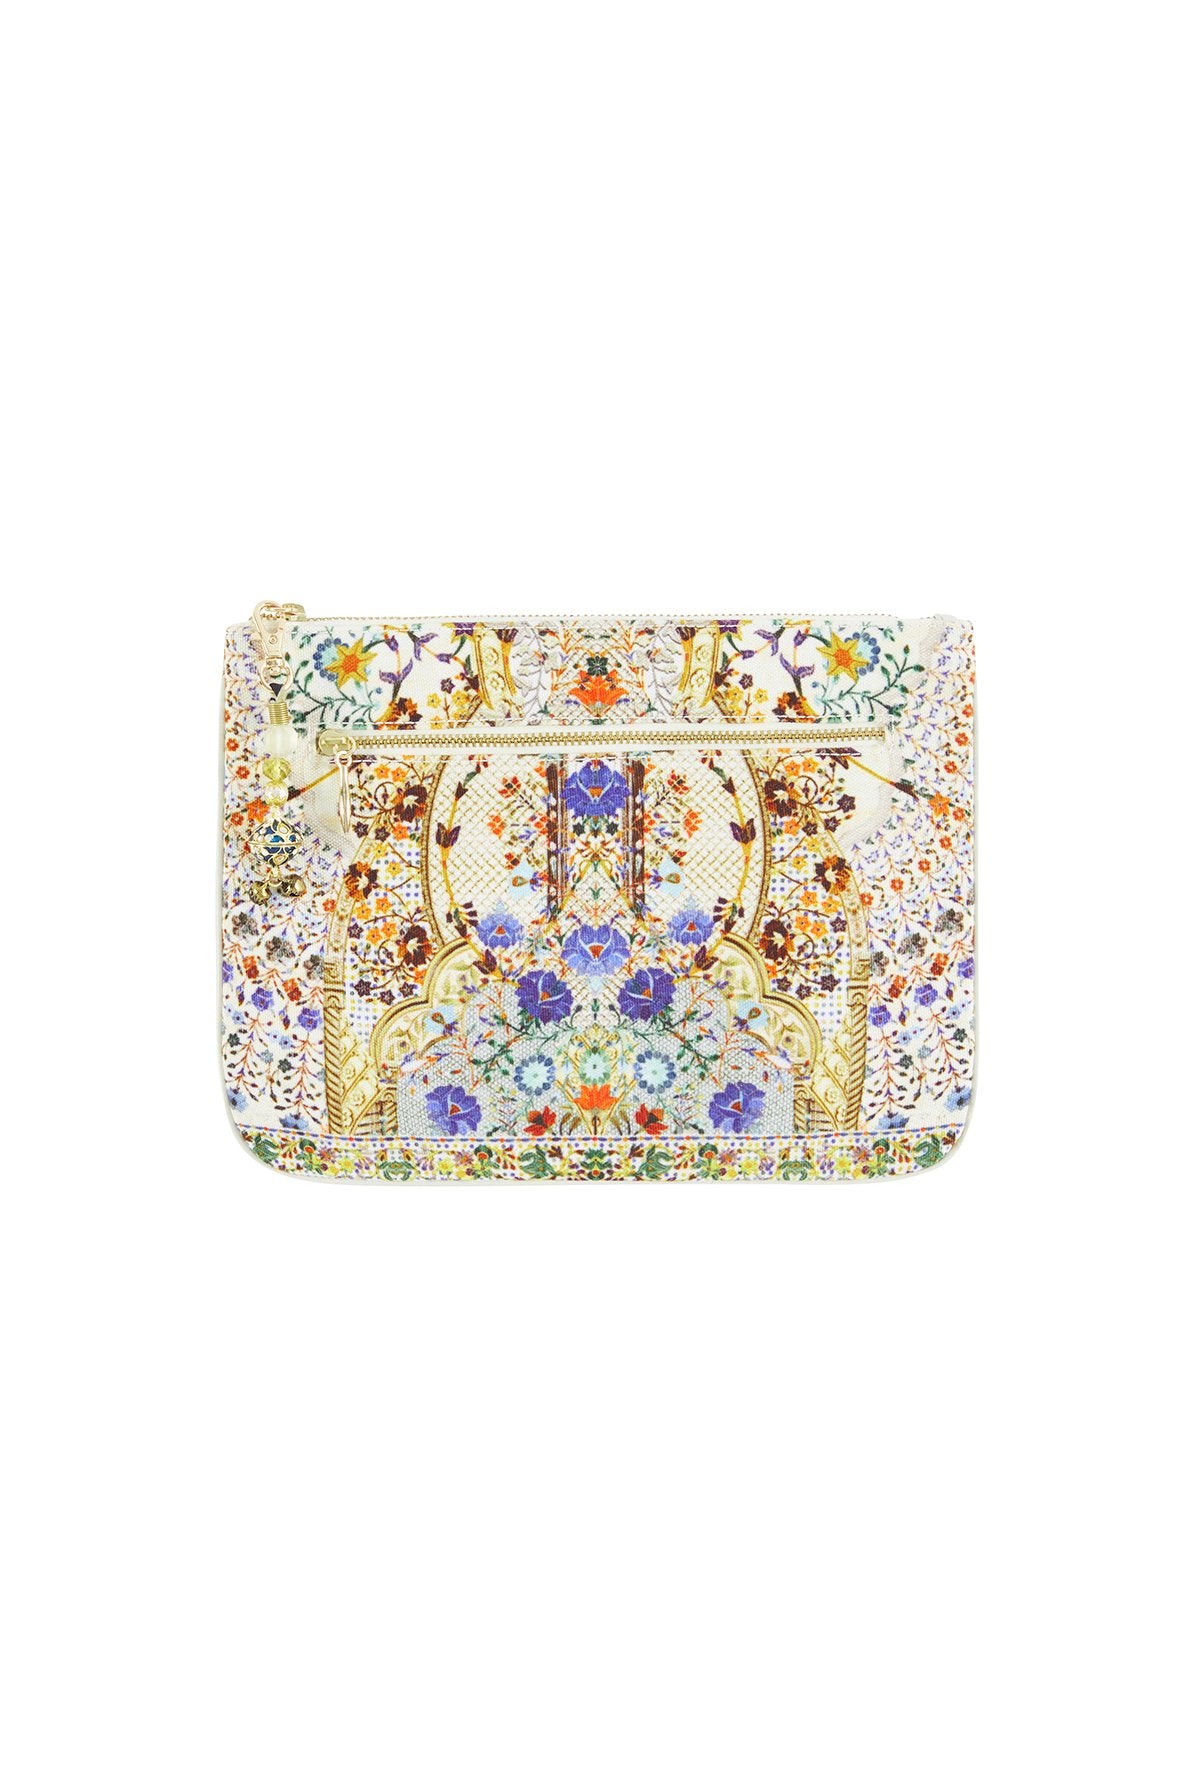 THE BUTTERFLY EFFECT SMALL CANVAS CLUTCH